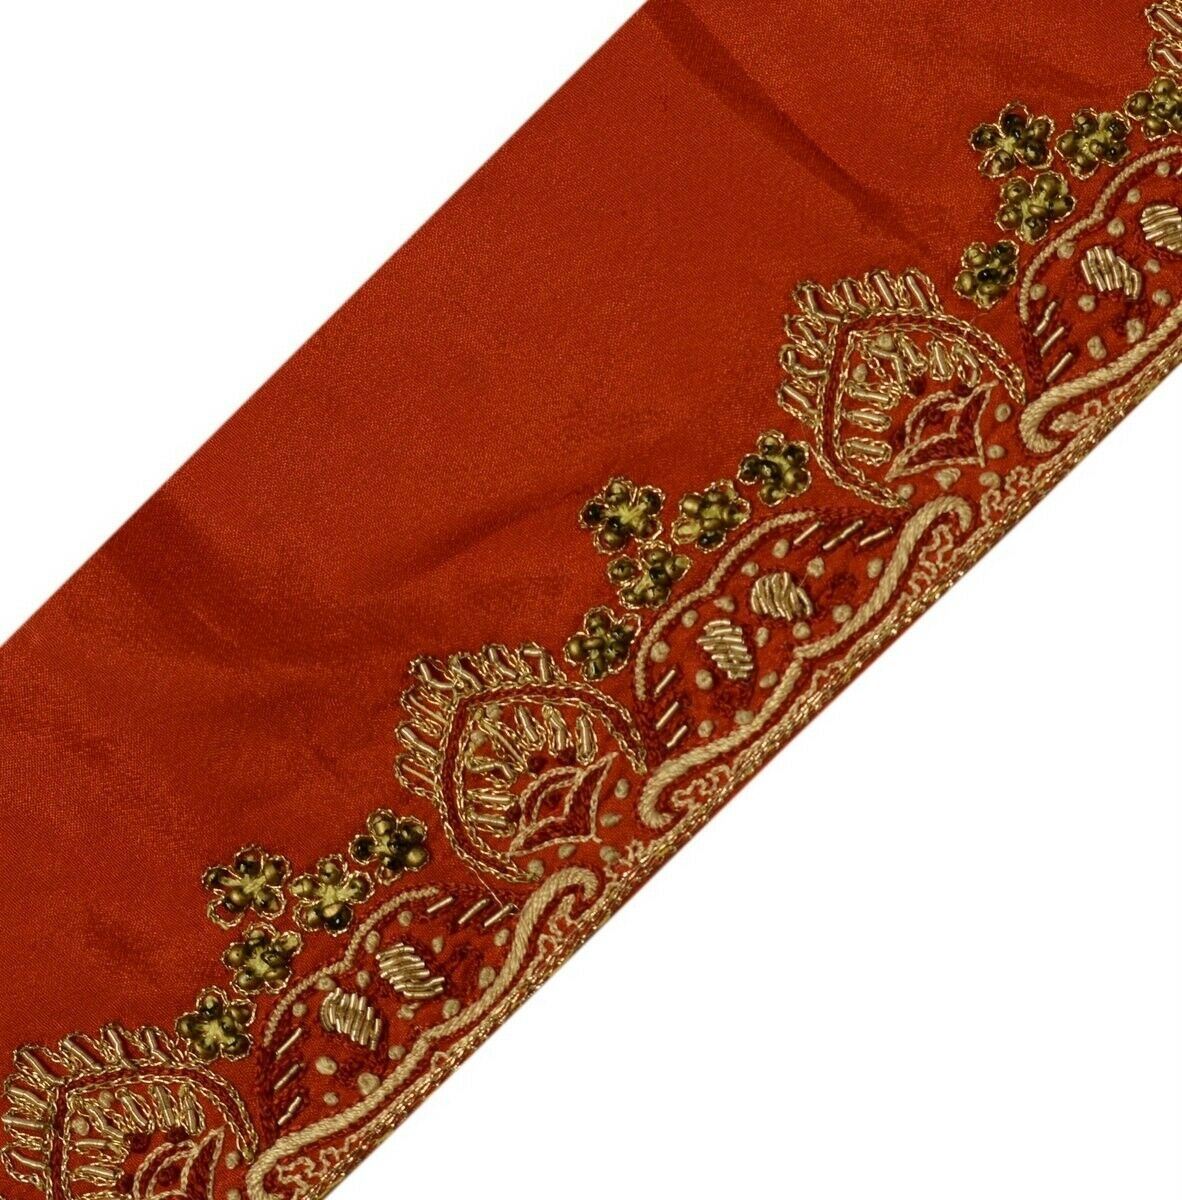 Vintage Saree Border Indian Craft Trim Hand Beaded Embroidered Ribbon Lace Rust